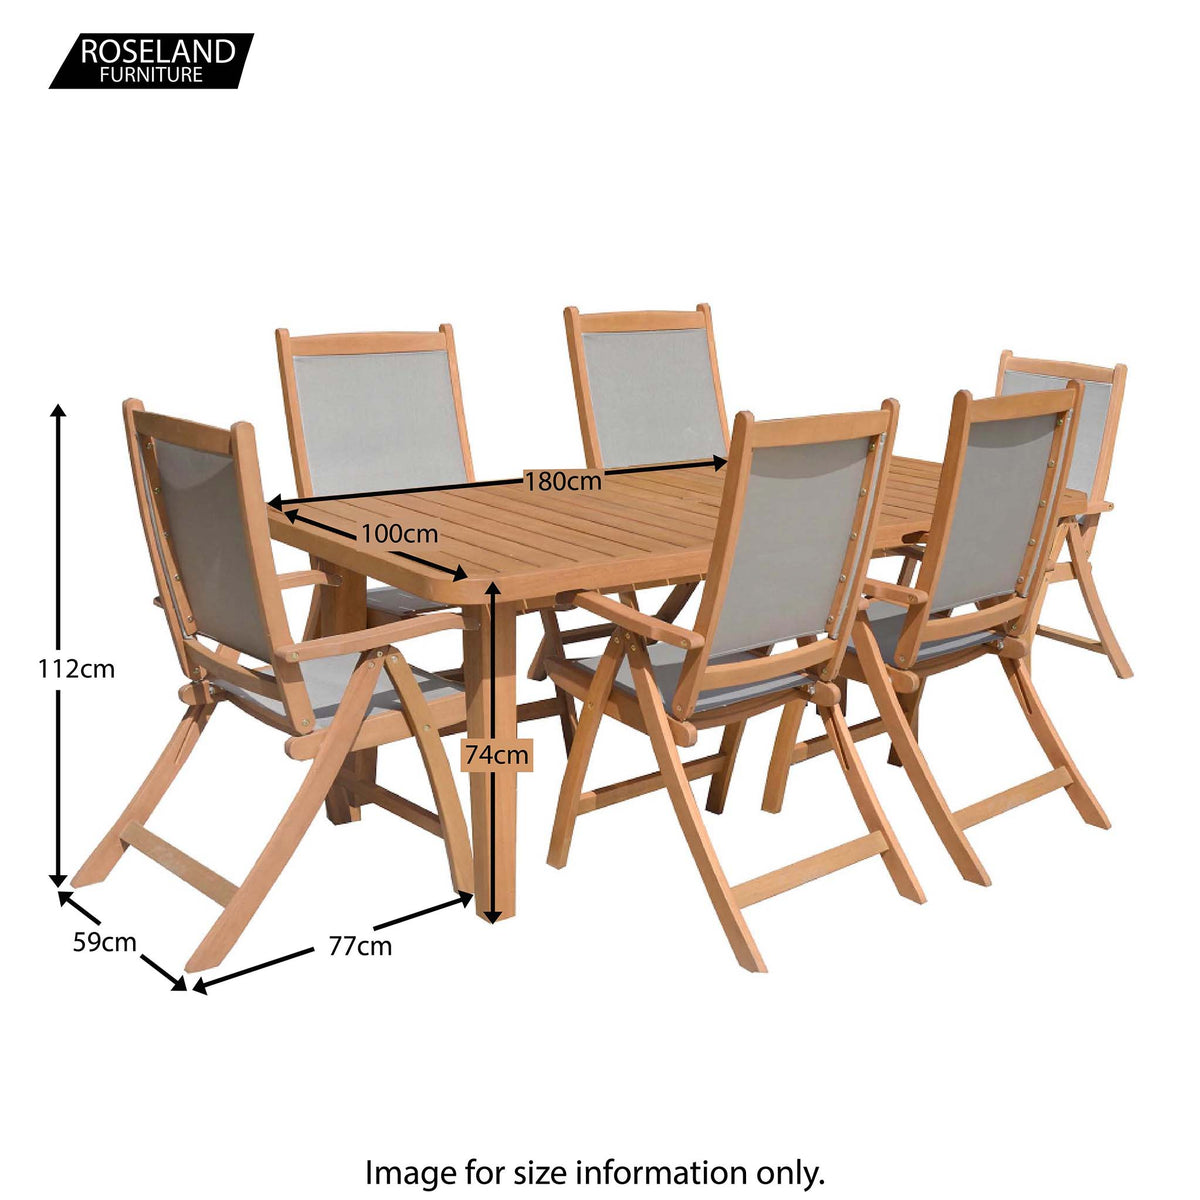 Broadway Acacia Wooden 6 Seat Garden Dining Set - Size Guide